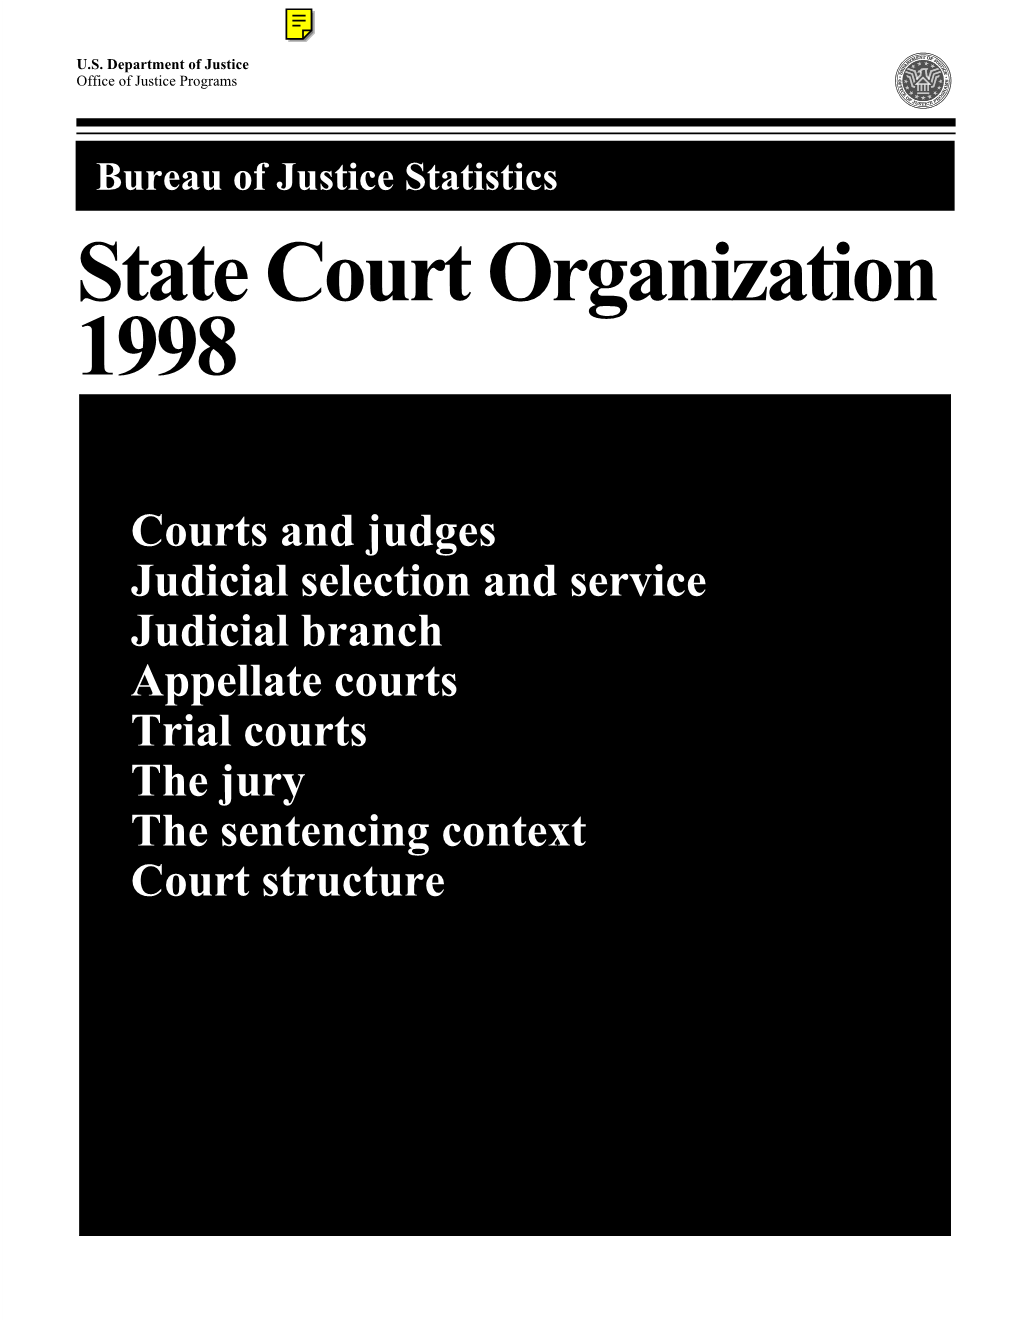 State Court Organization, 1998 Conference of State Court Administrators, Court Statistics Committee